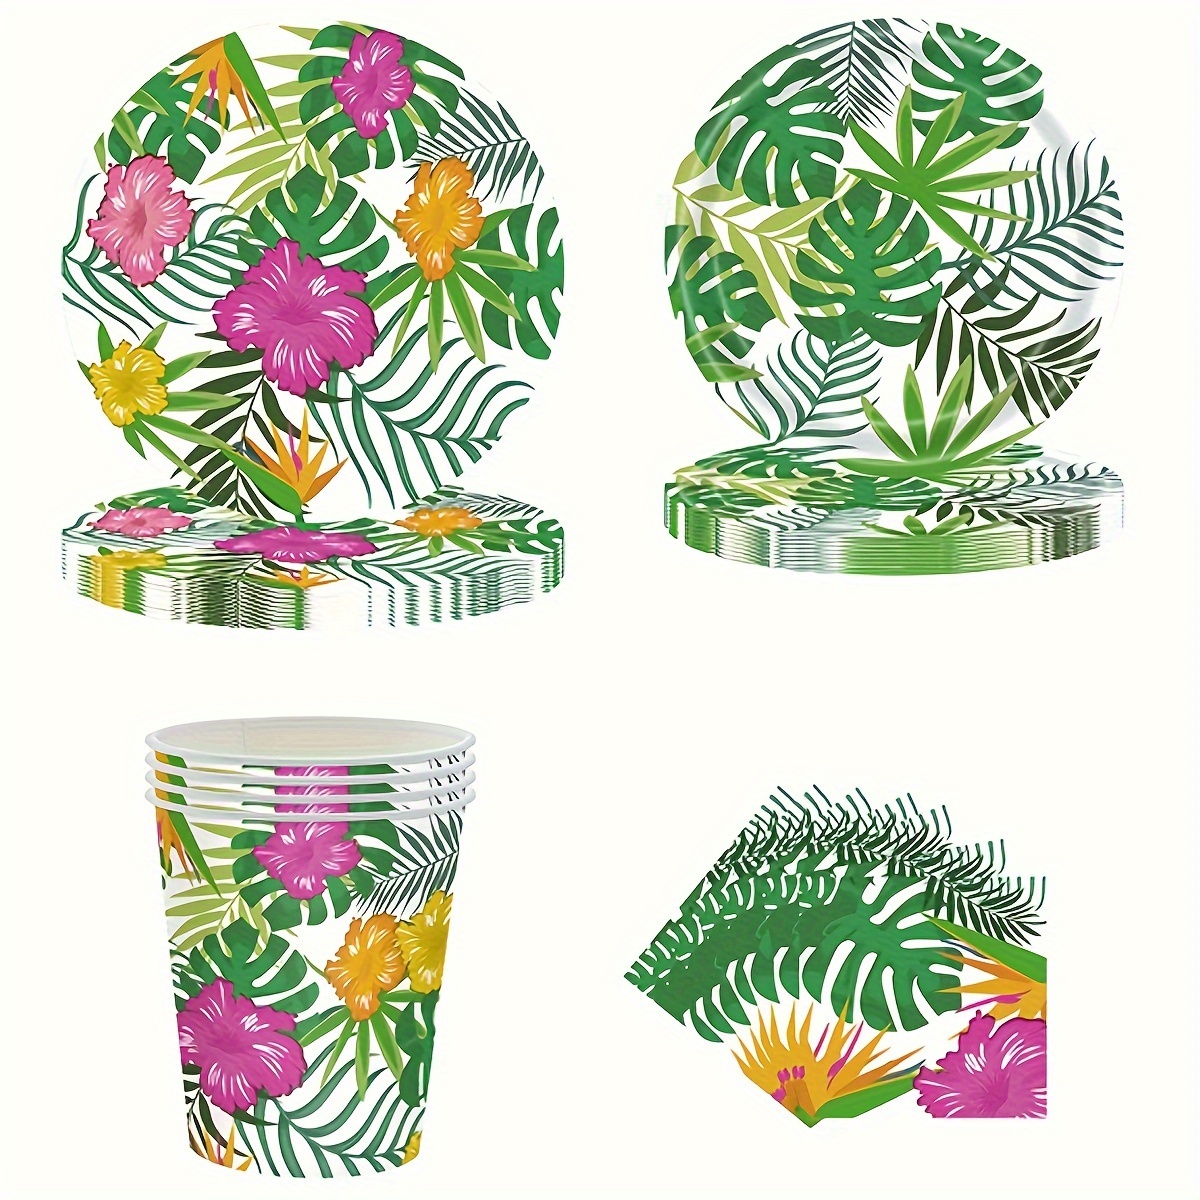 

Set, Hawaii Flower Party Tableware Set, Disposable Dinnerware Set, Table Decor, Birthday Decor, Picnic Utensil, Scene Decor, Tropical Summer Party Atmosphere Props, Holiday Supplies